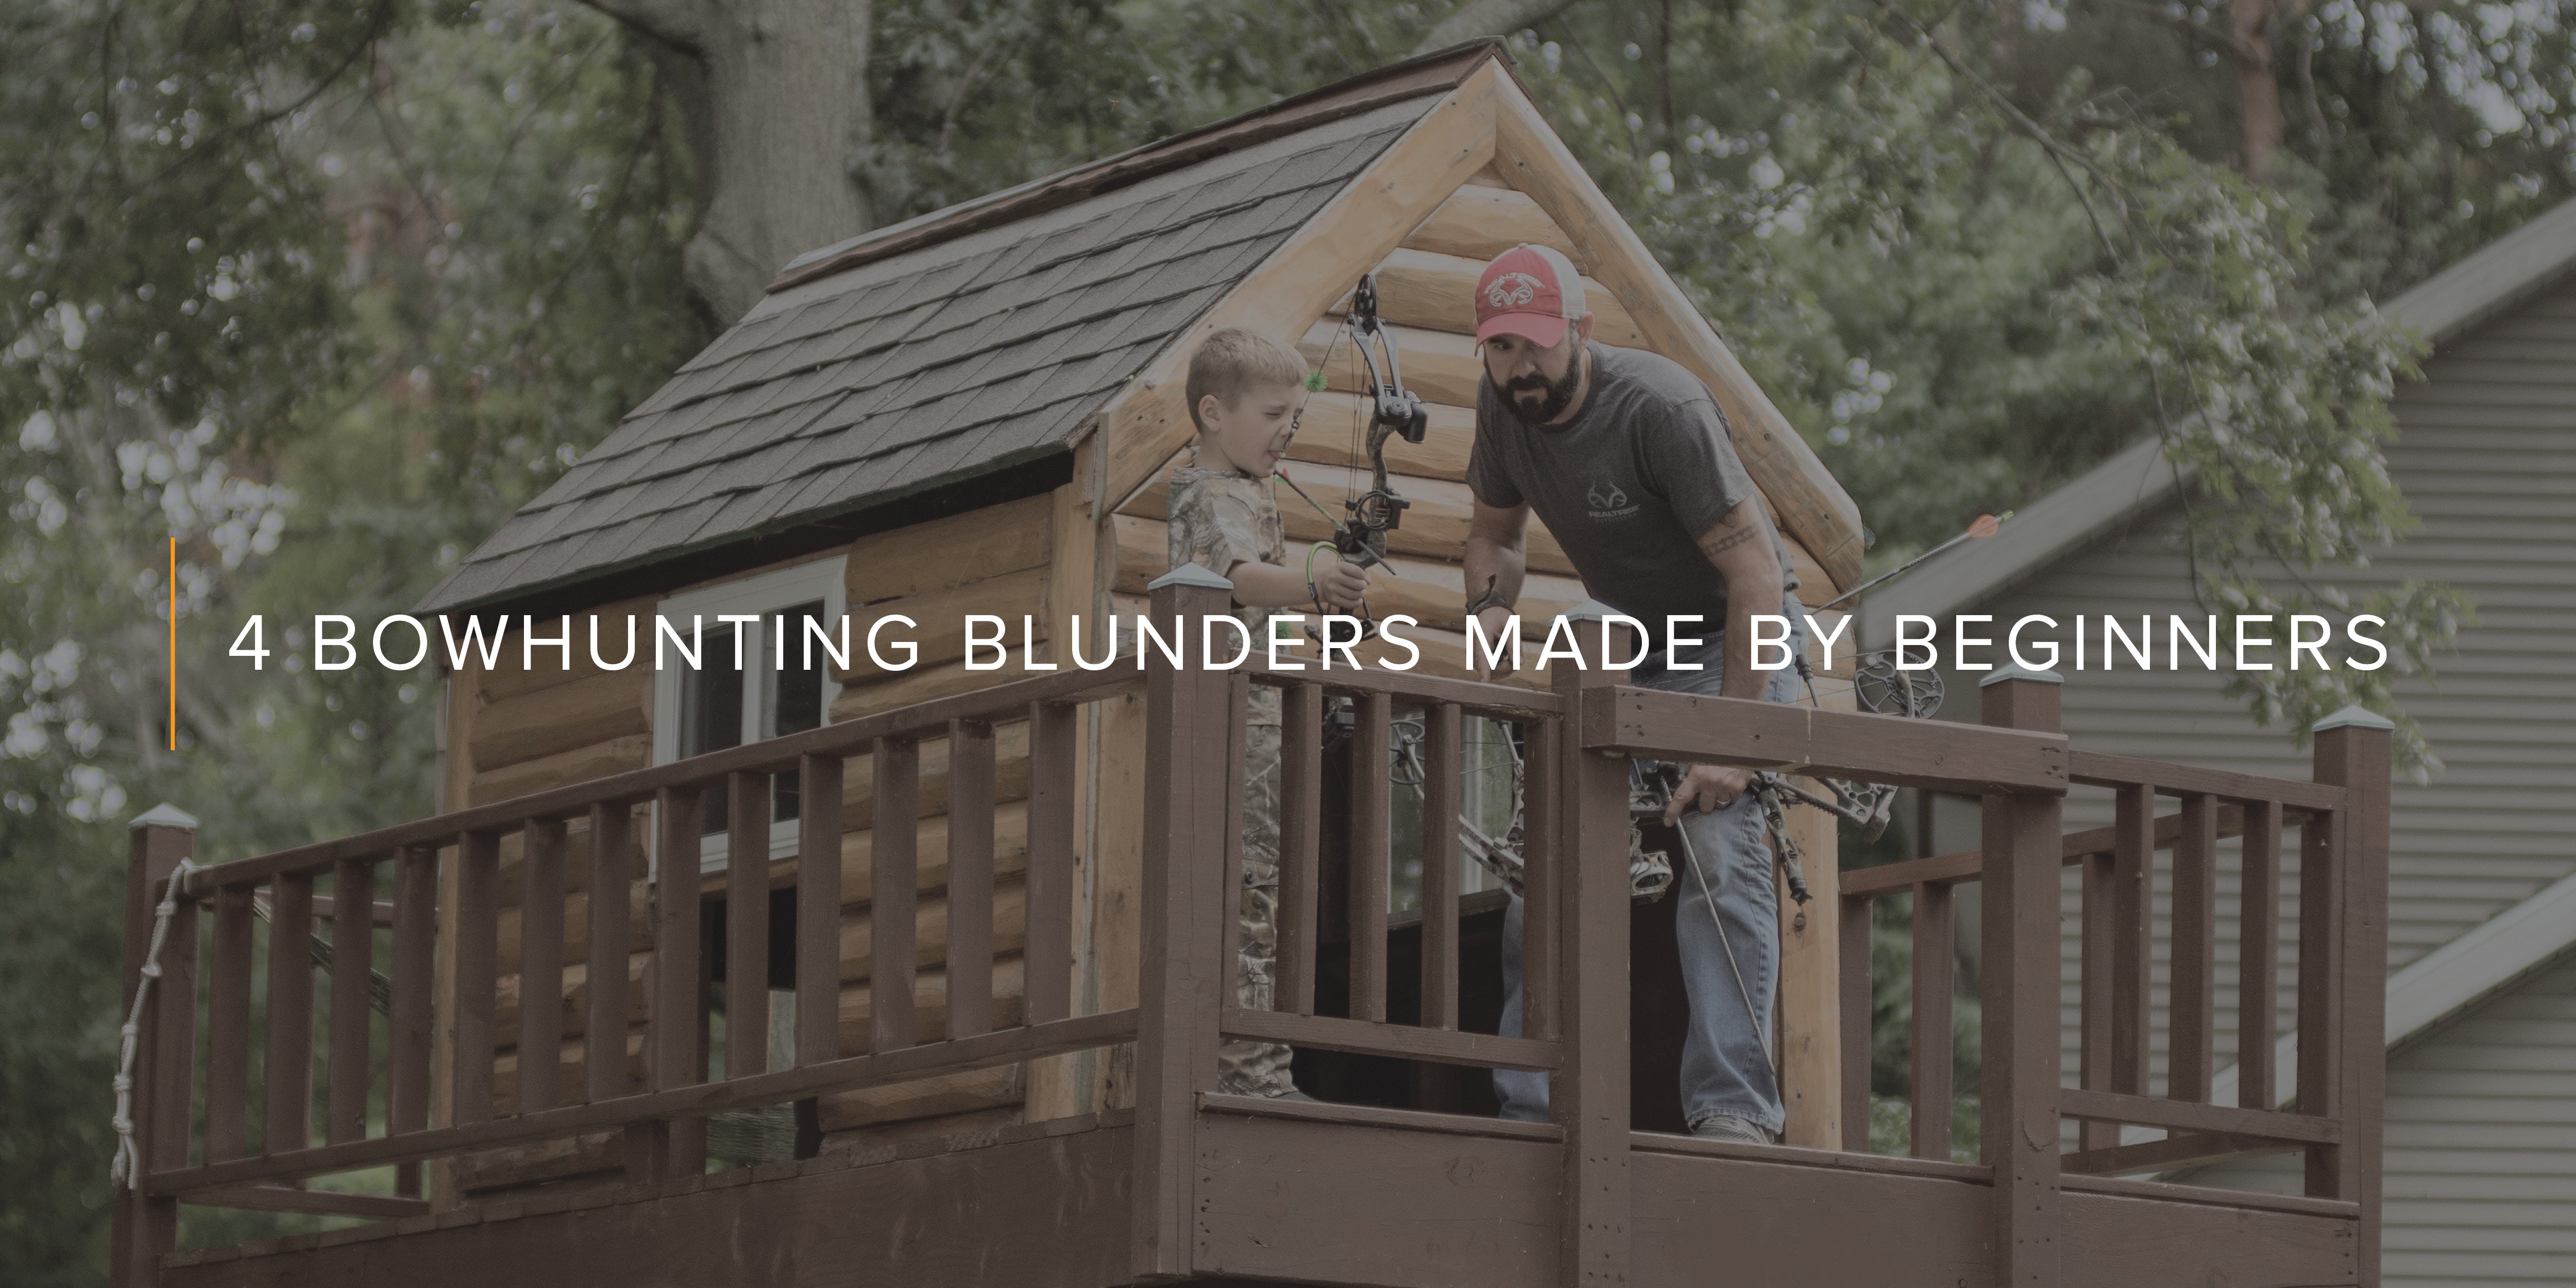 4 Bowhunting Blunders Made By Beginners